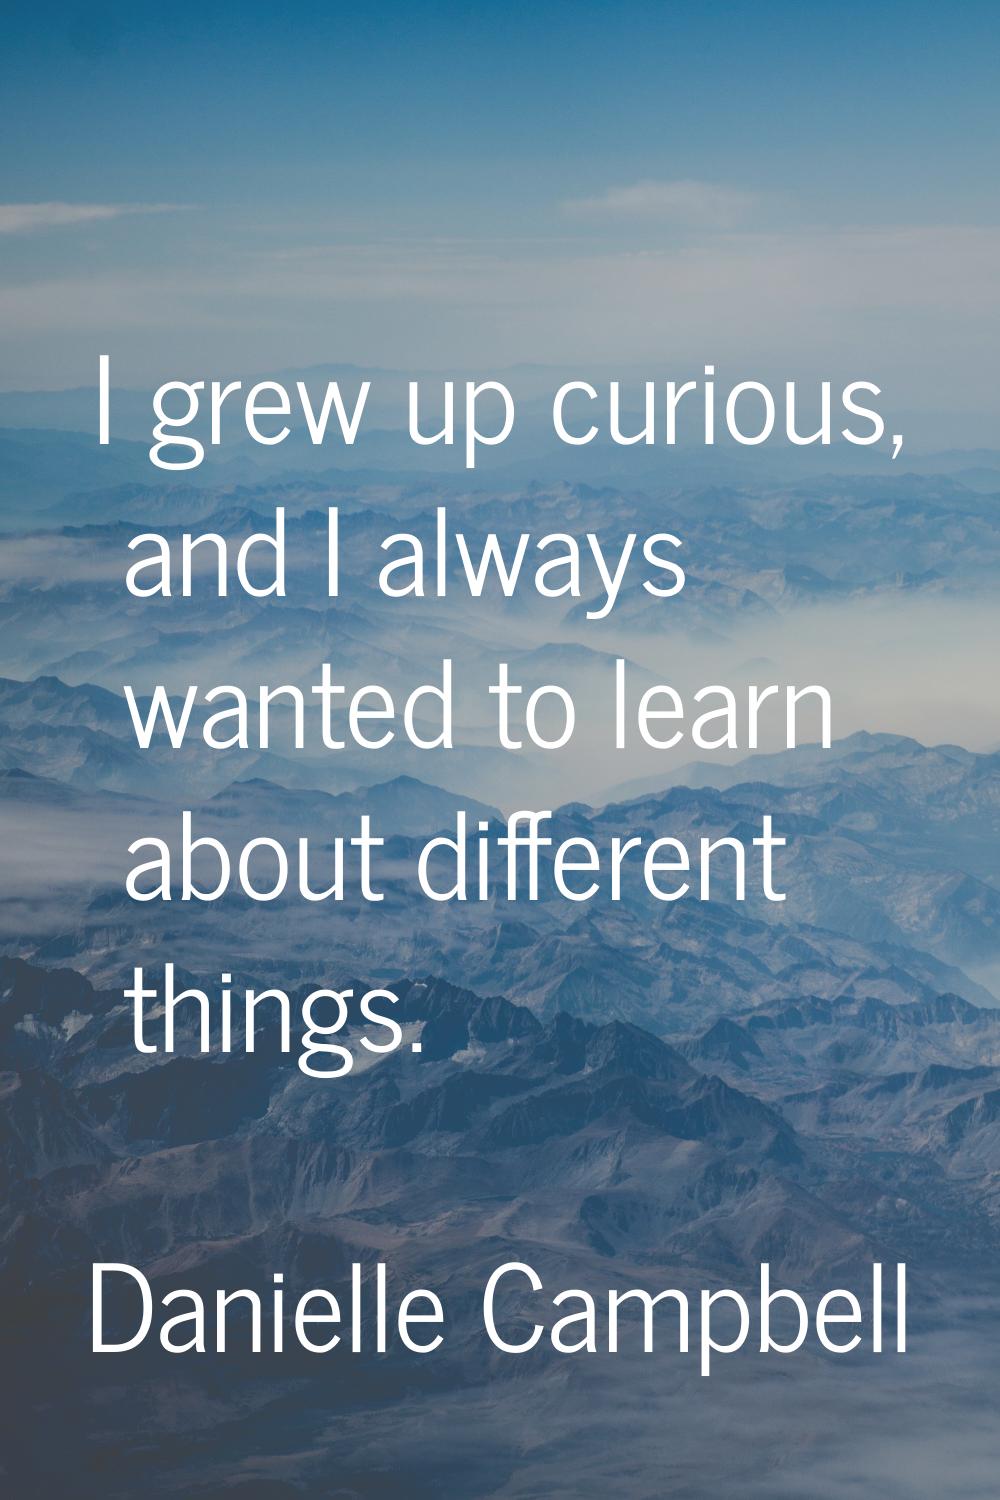 I grew up curious, and I always wanted to learn about different things.